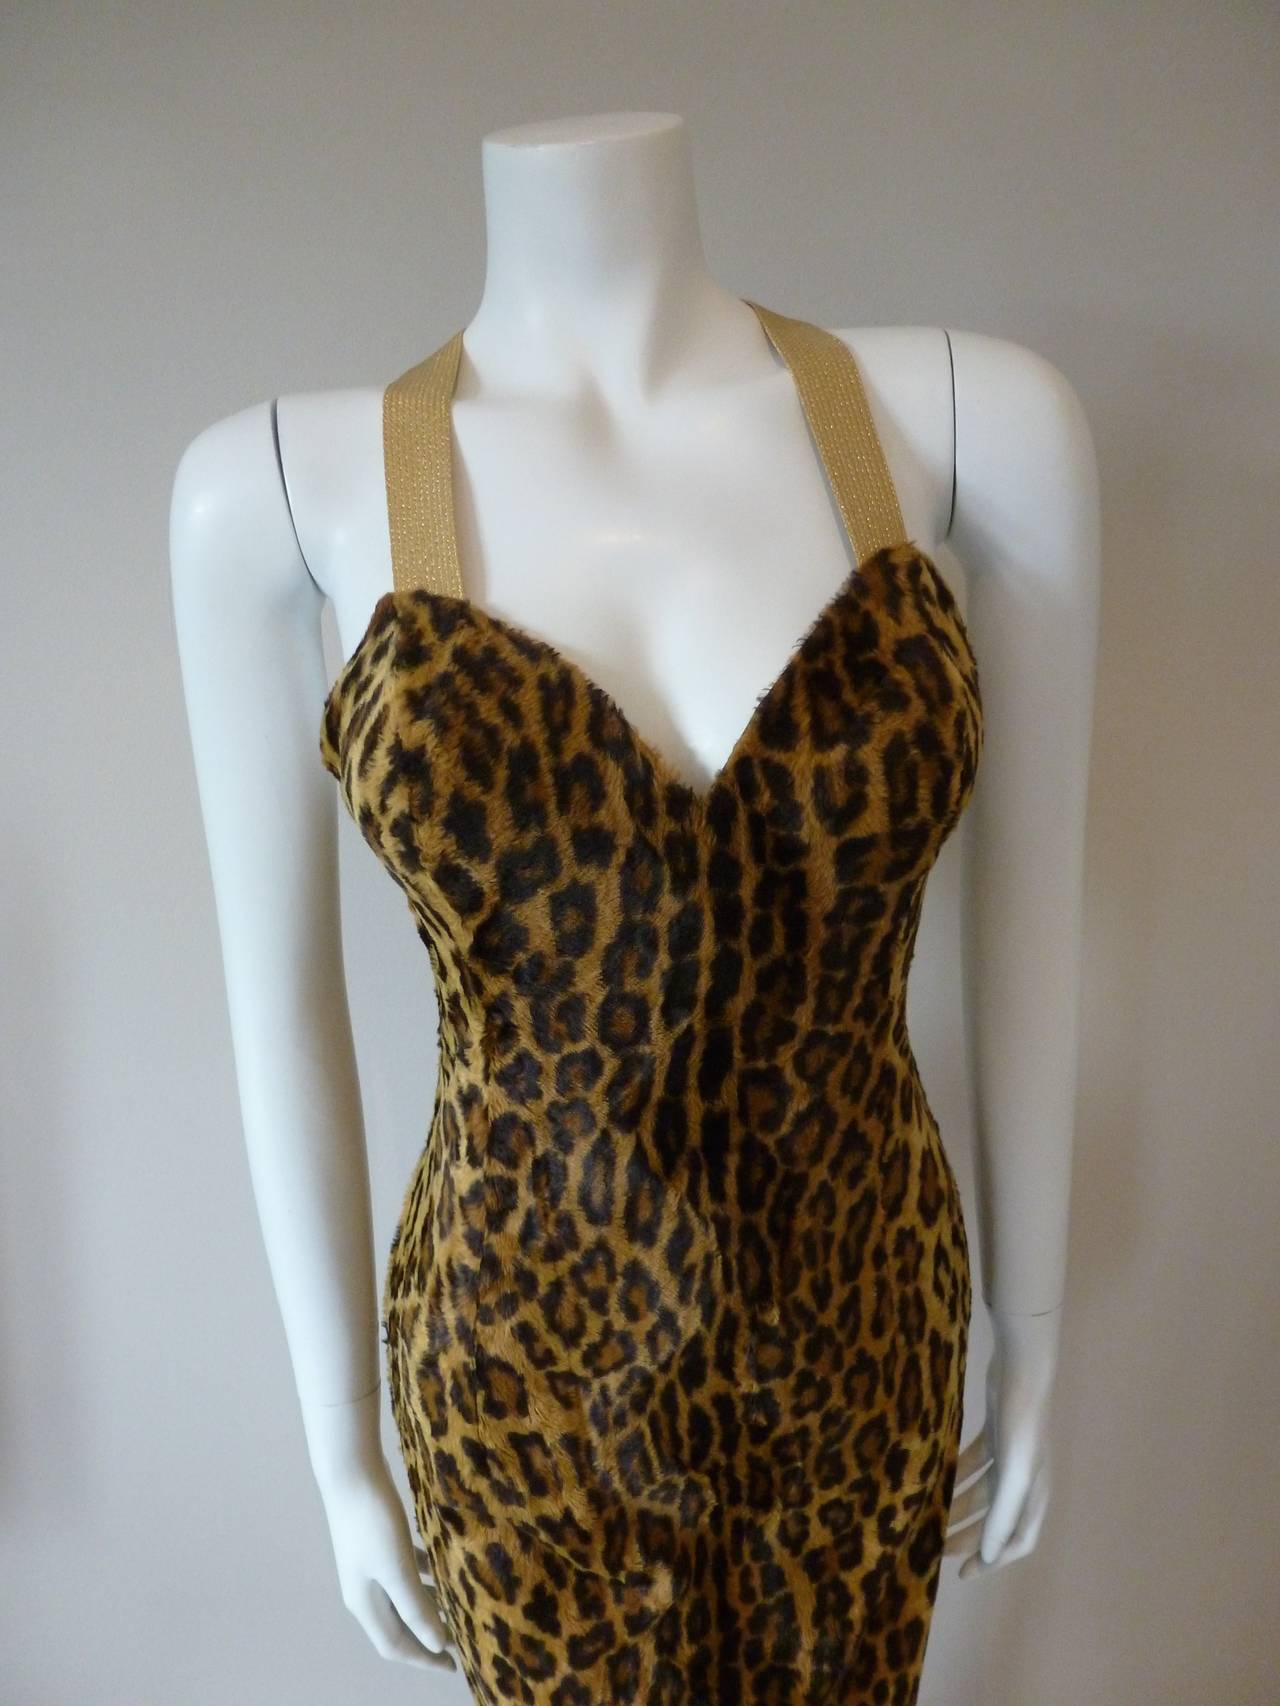 Gianni Versace Couture Animal Print Gown Fall 1994 at 1stDibs